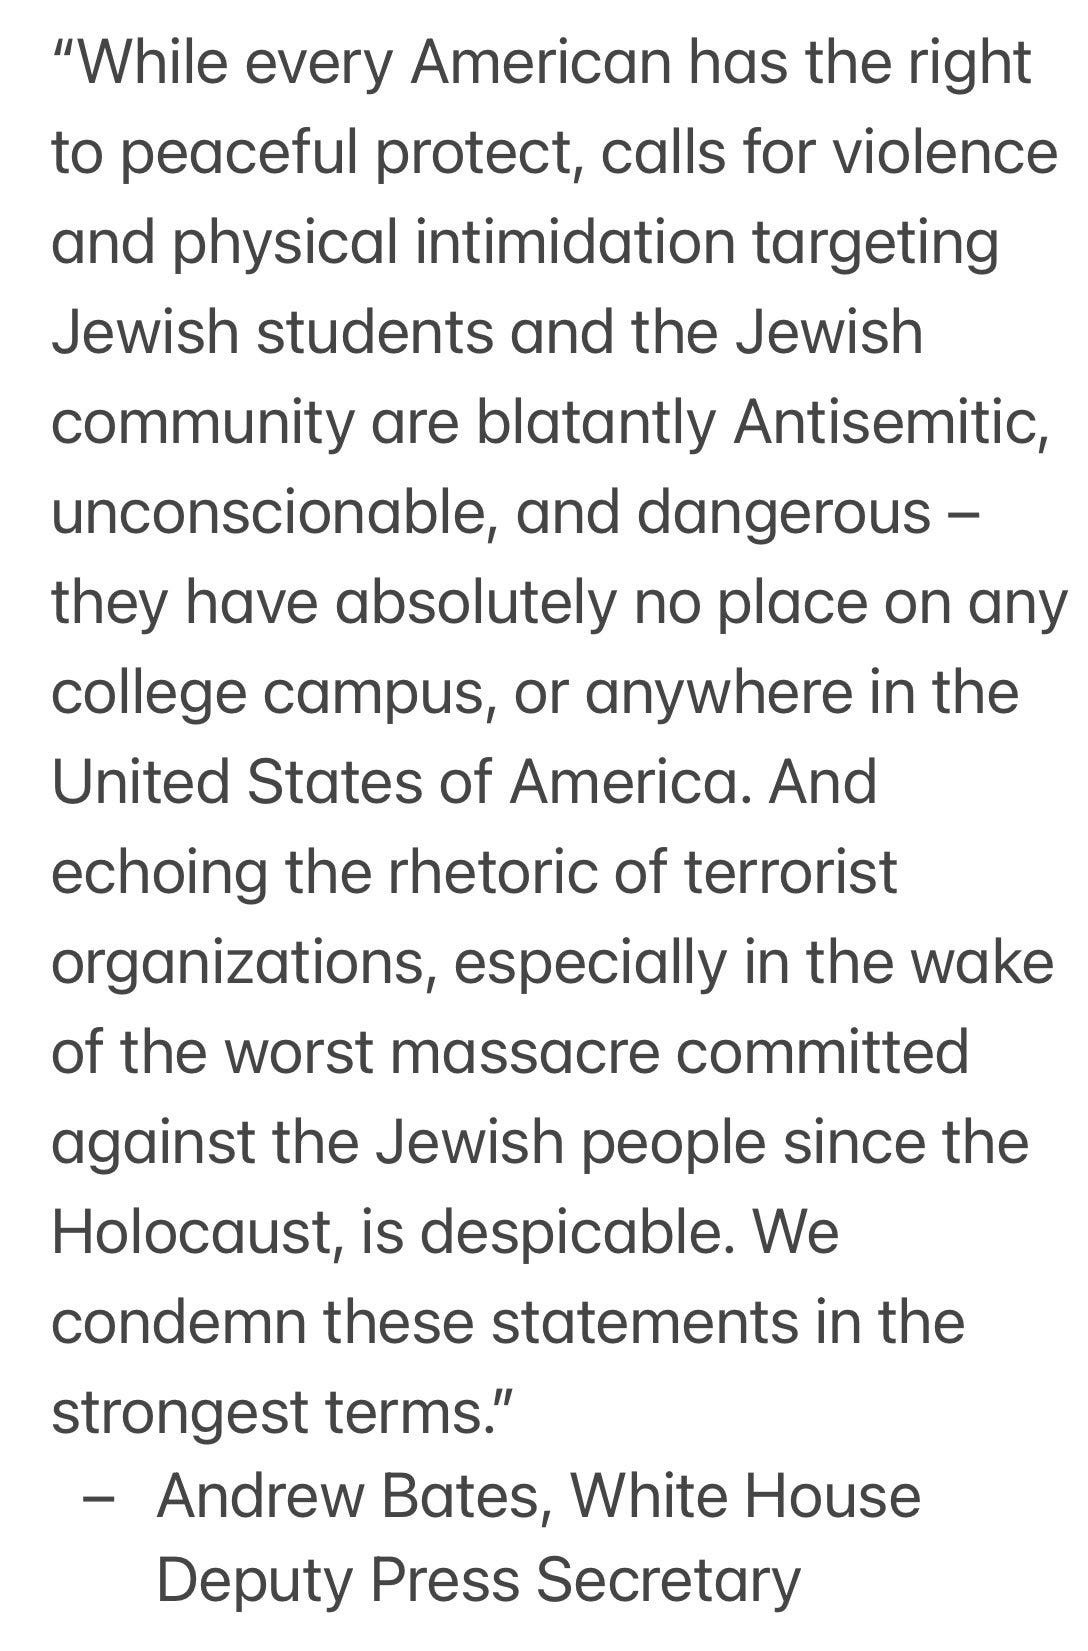 . @WhiteHouse  statement on protests at  @Columbia :  “Calls for violence and physical intimidation targeting Jewish students and the Jewish community are blatantly antisemitic, unconscionable, and dangerous –they have absolutely no place on any college campus, or anywhere in the US”